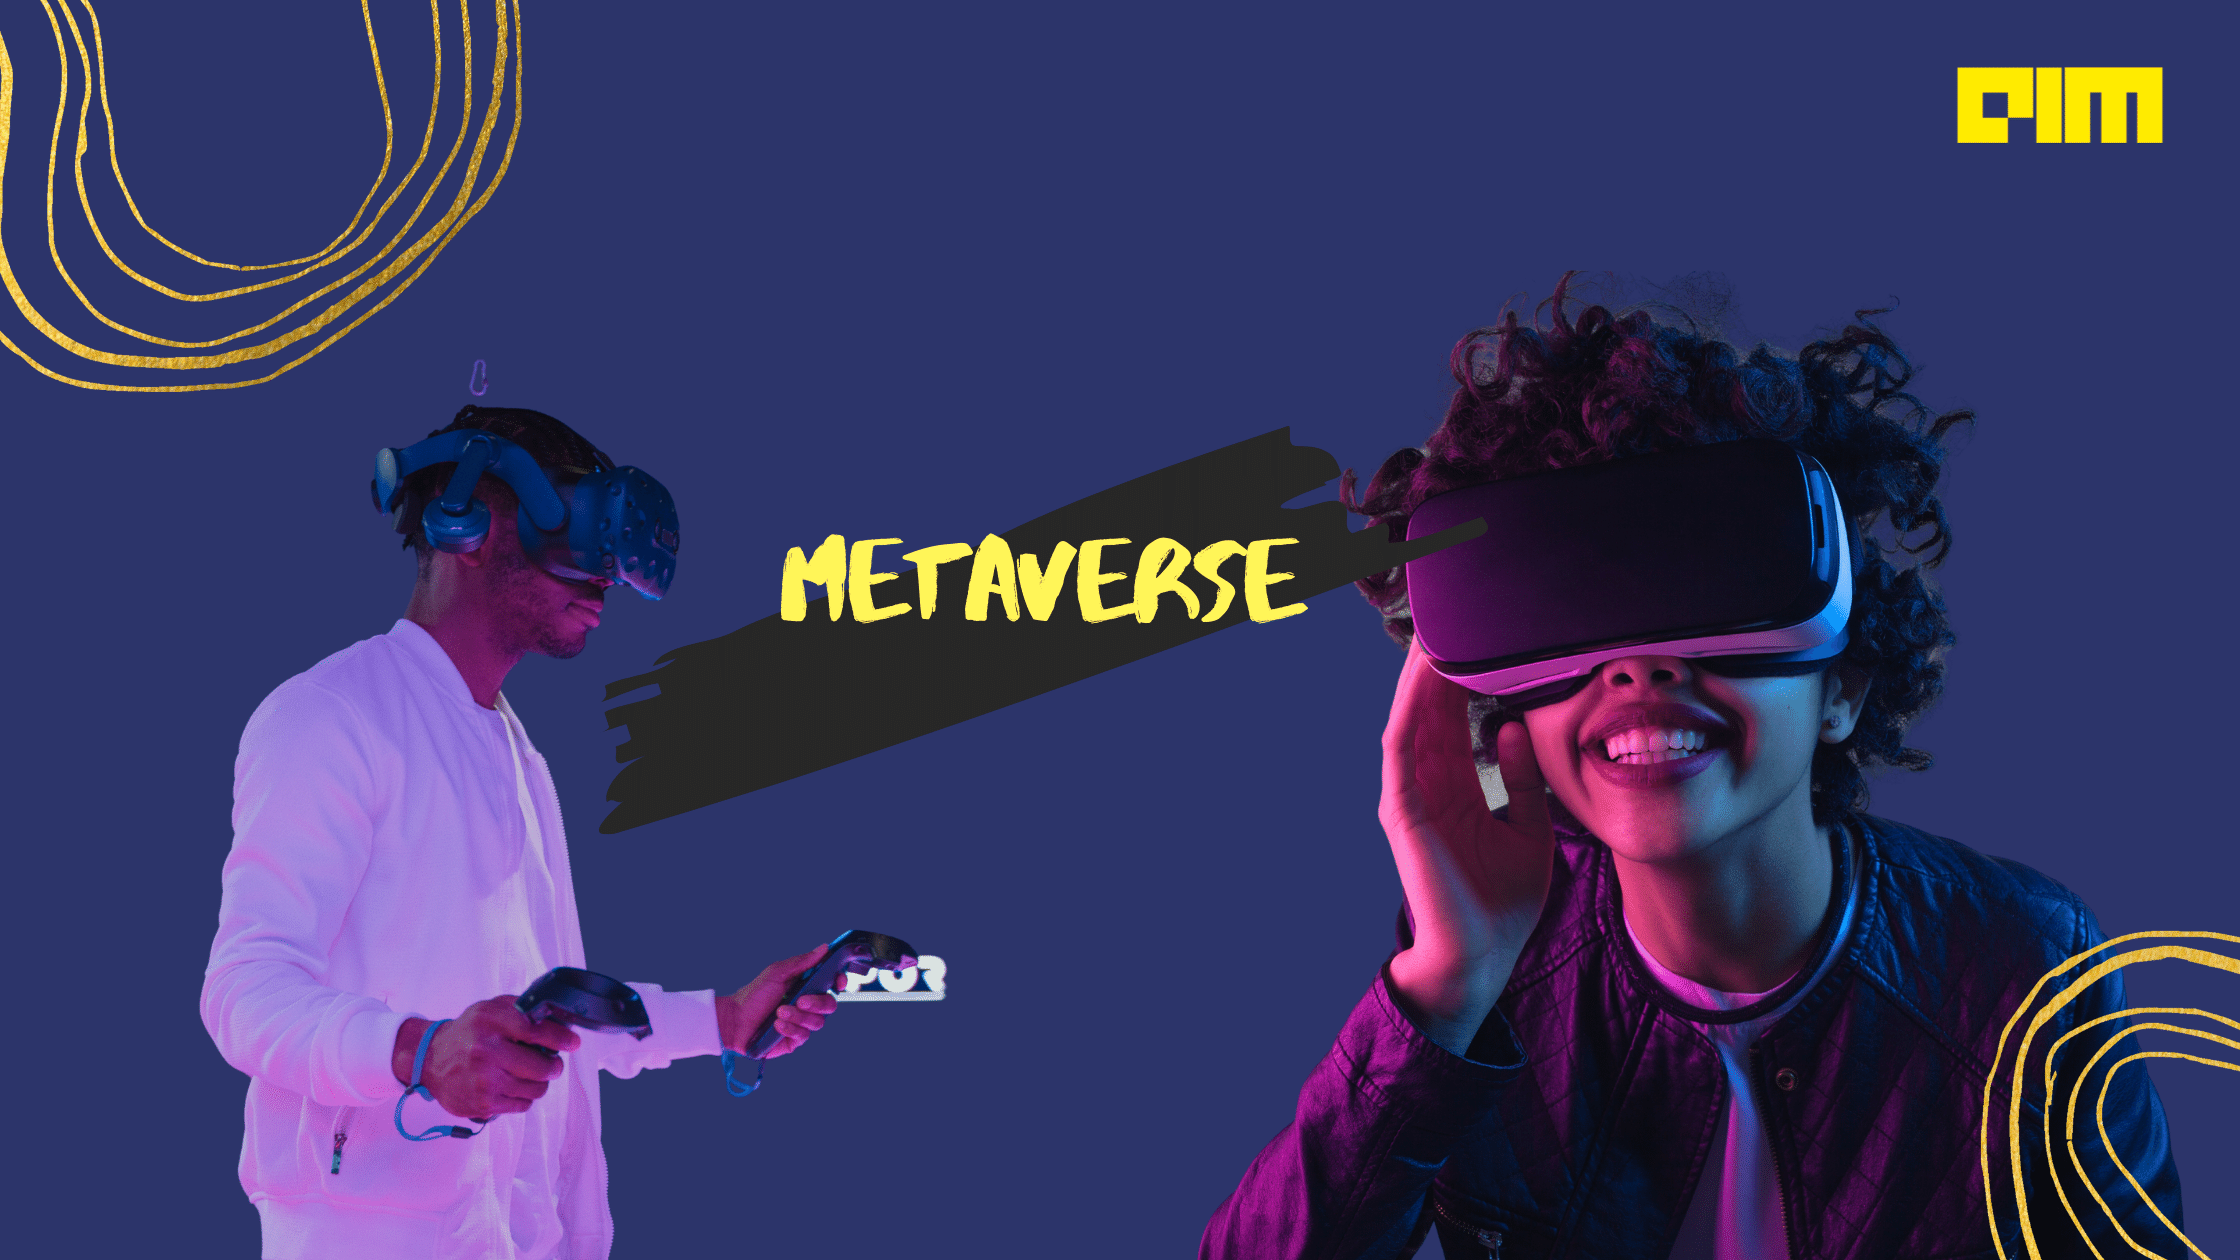 Top three Metaverse platforms in 2022. And no, it doesn’t include Facebook